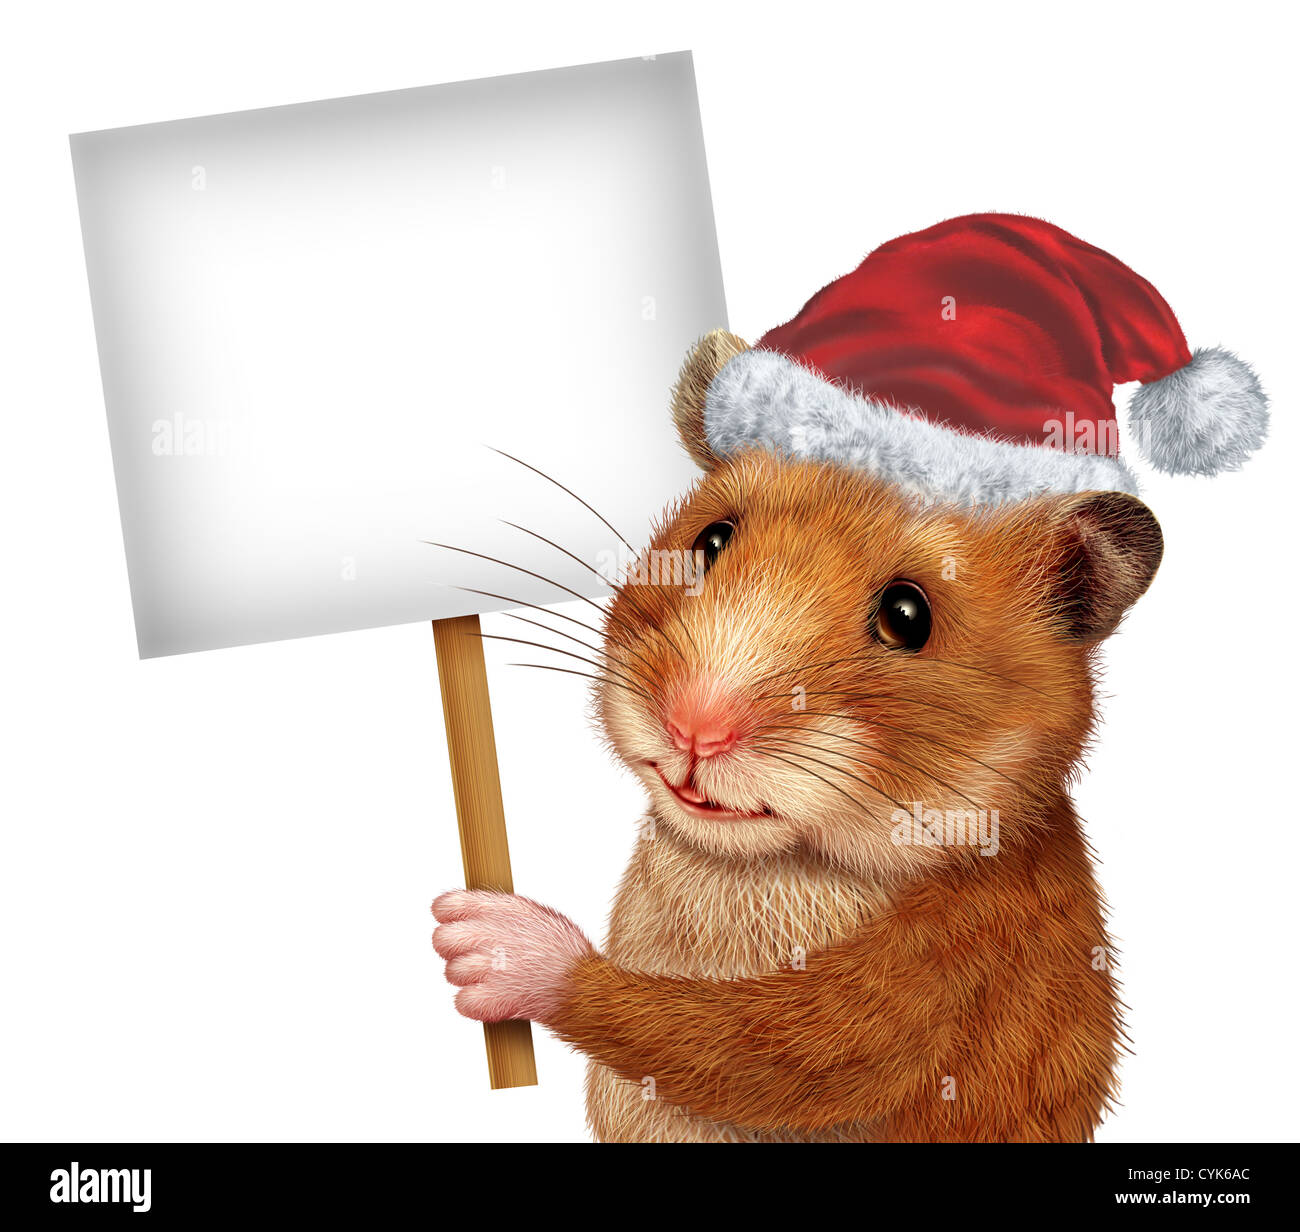 Holiday pet holding a blank white sign as an advertising and marketing concept with a cute mouse like mammal with a smile communicating an important Veterinary or Veterinarian related message. Stock Photo